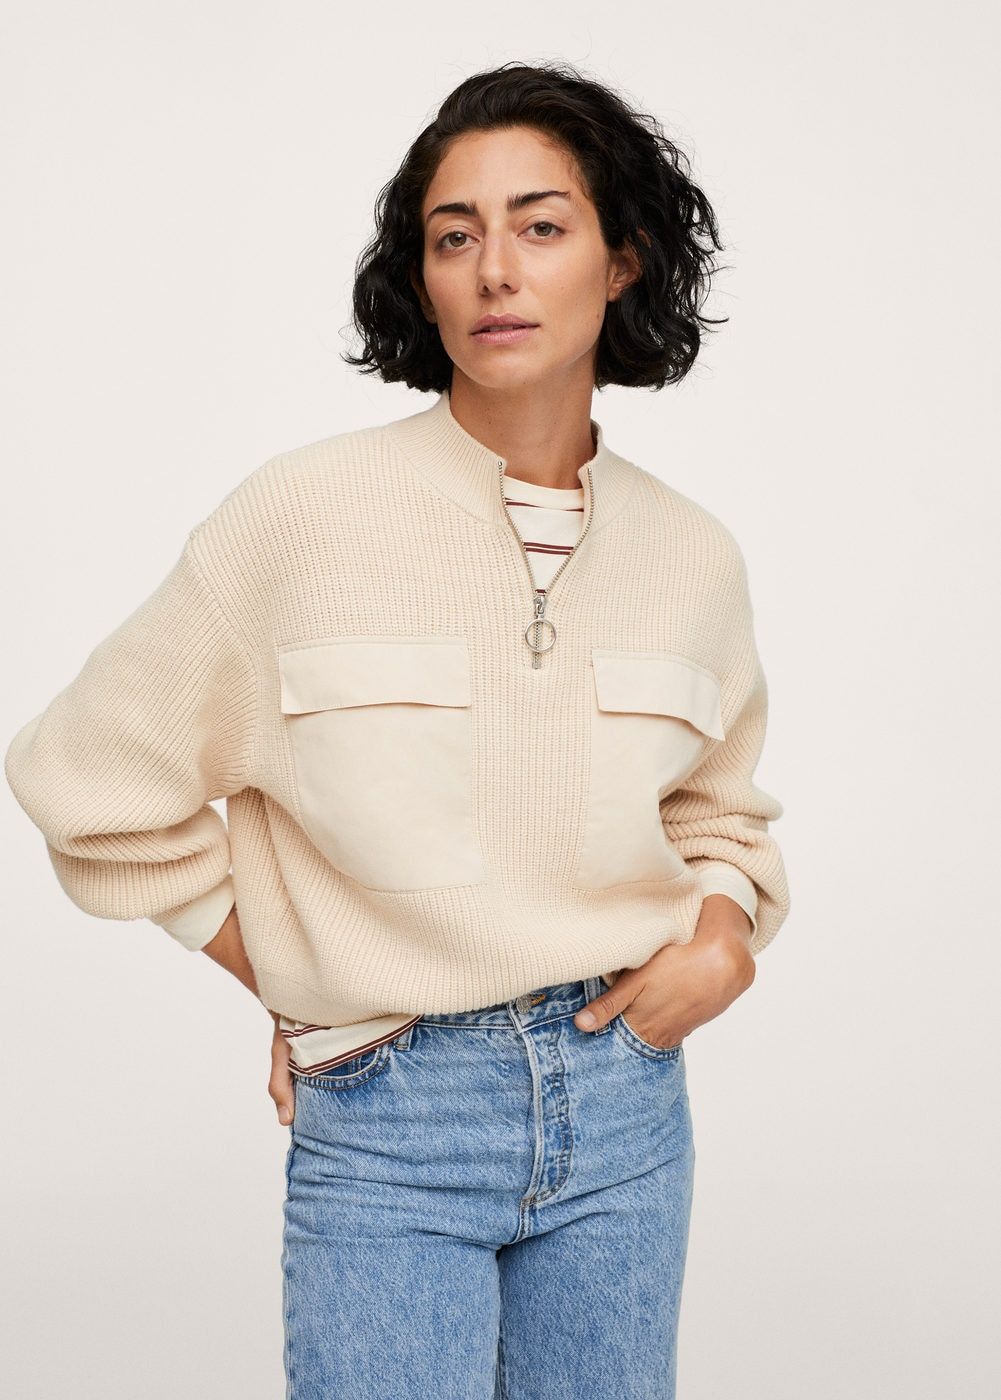 The Preppy Sweater Trend That's About to Dominate Fall 2021 | Who What Wear